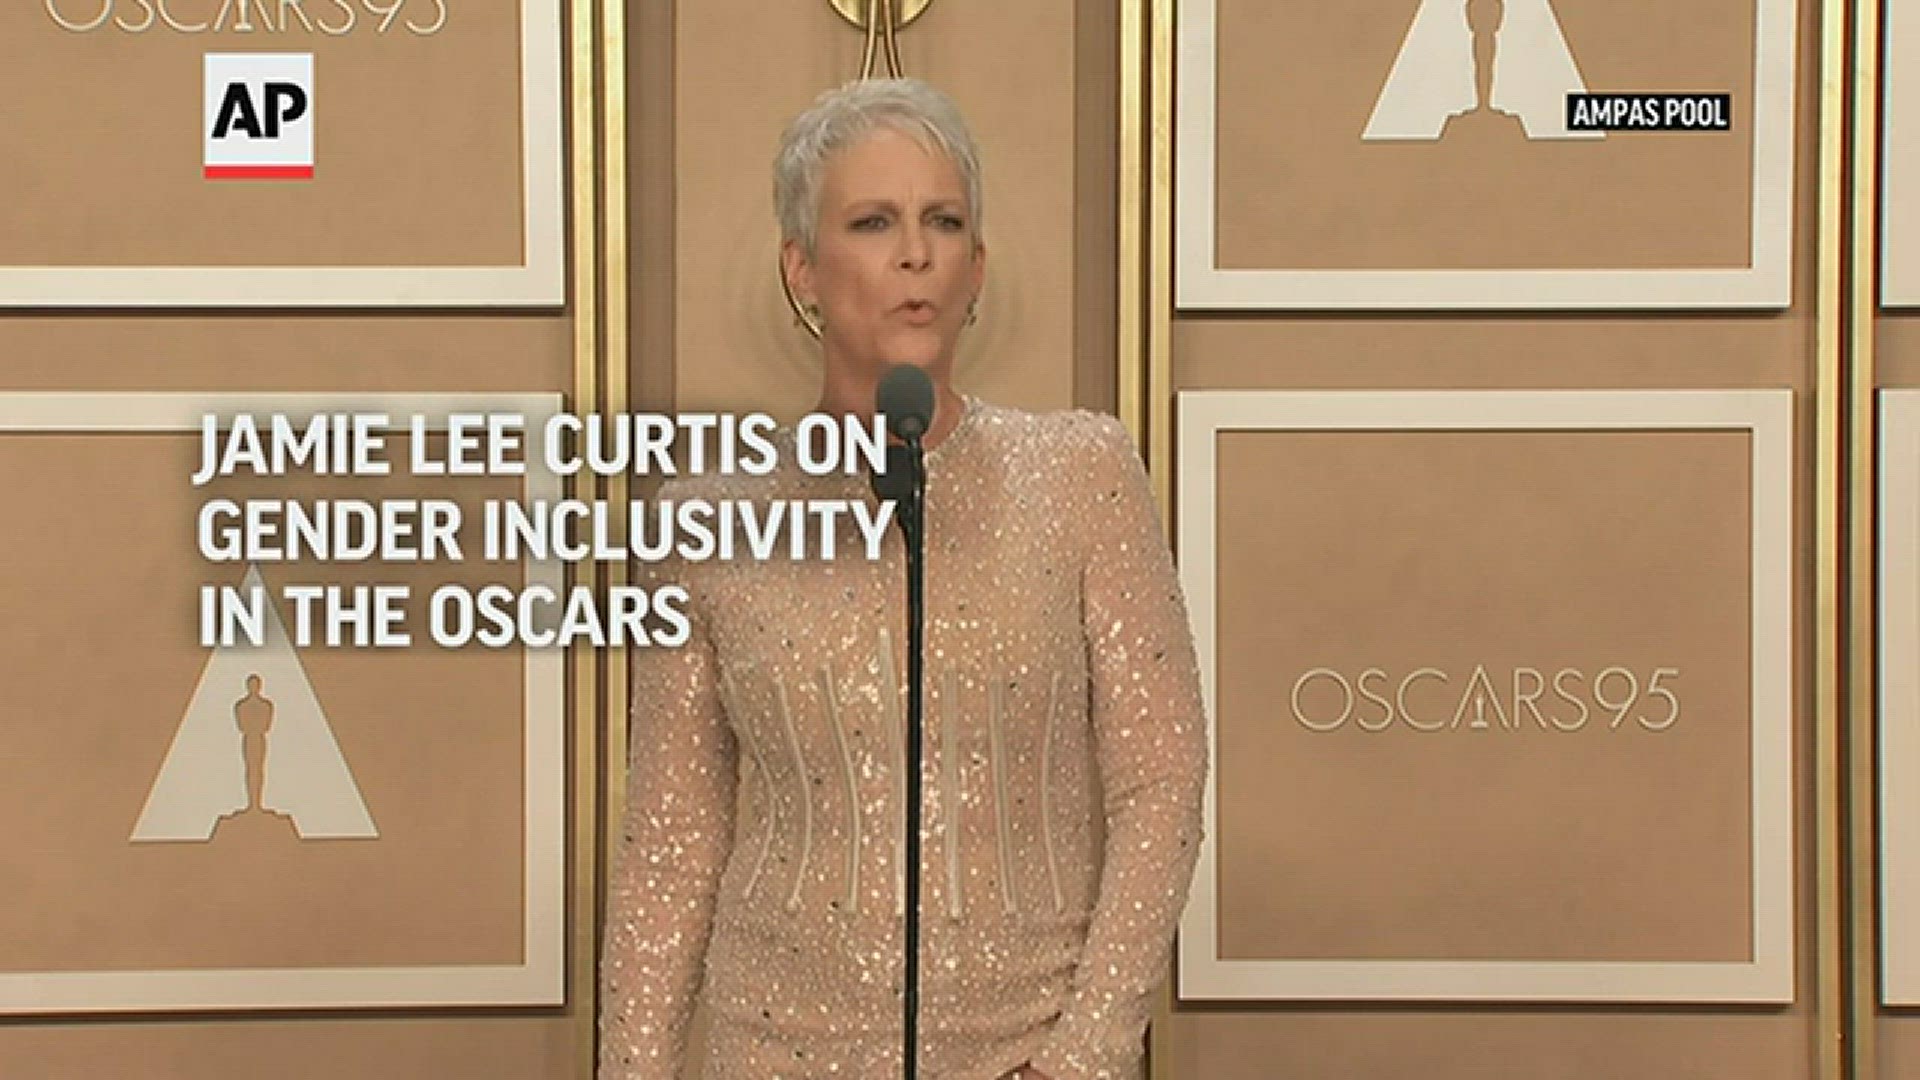 Jamie Lee Curtis discussed whether best acting categories should be "de-gendered" after winning best supporting actress at the Oscars.